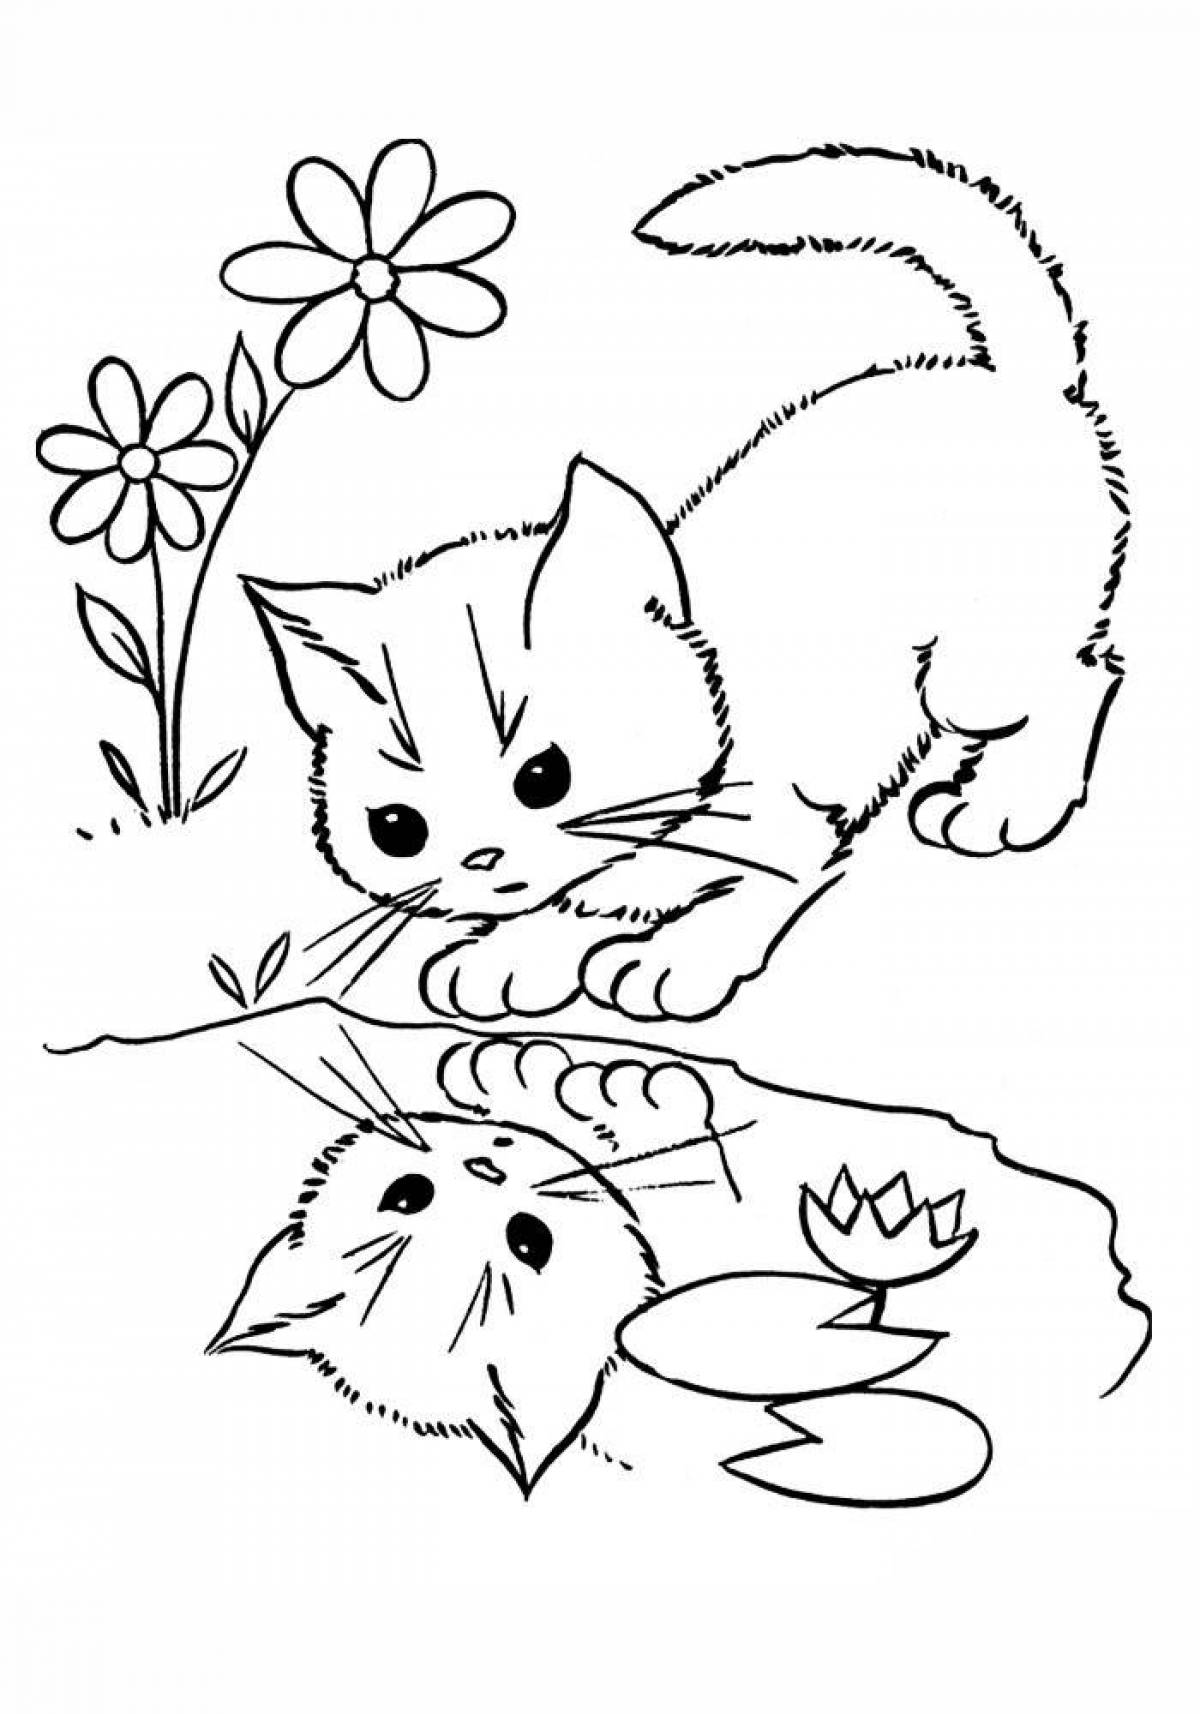 Crazy cat coloring pages for kids